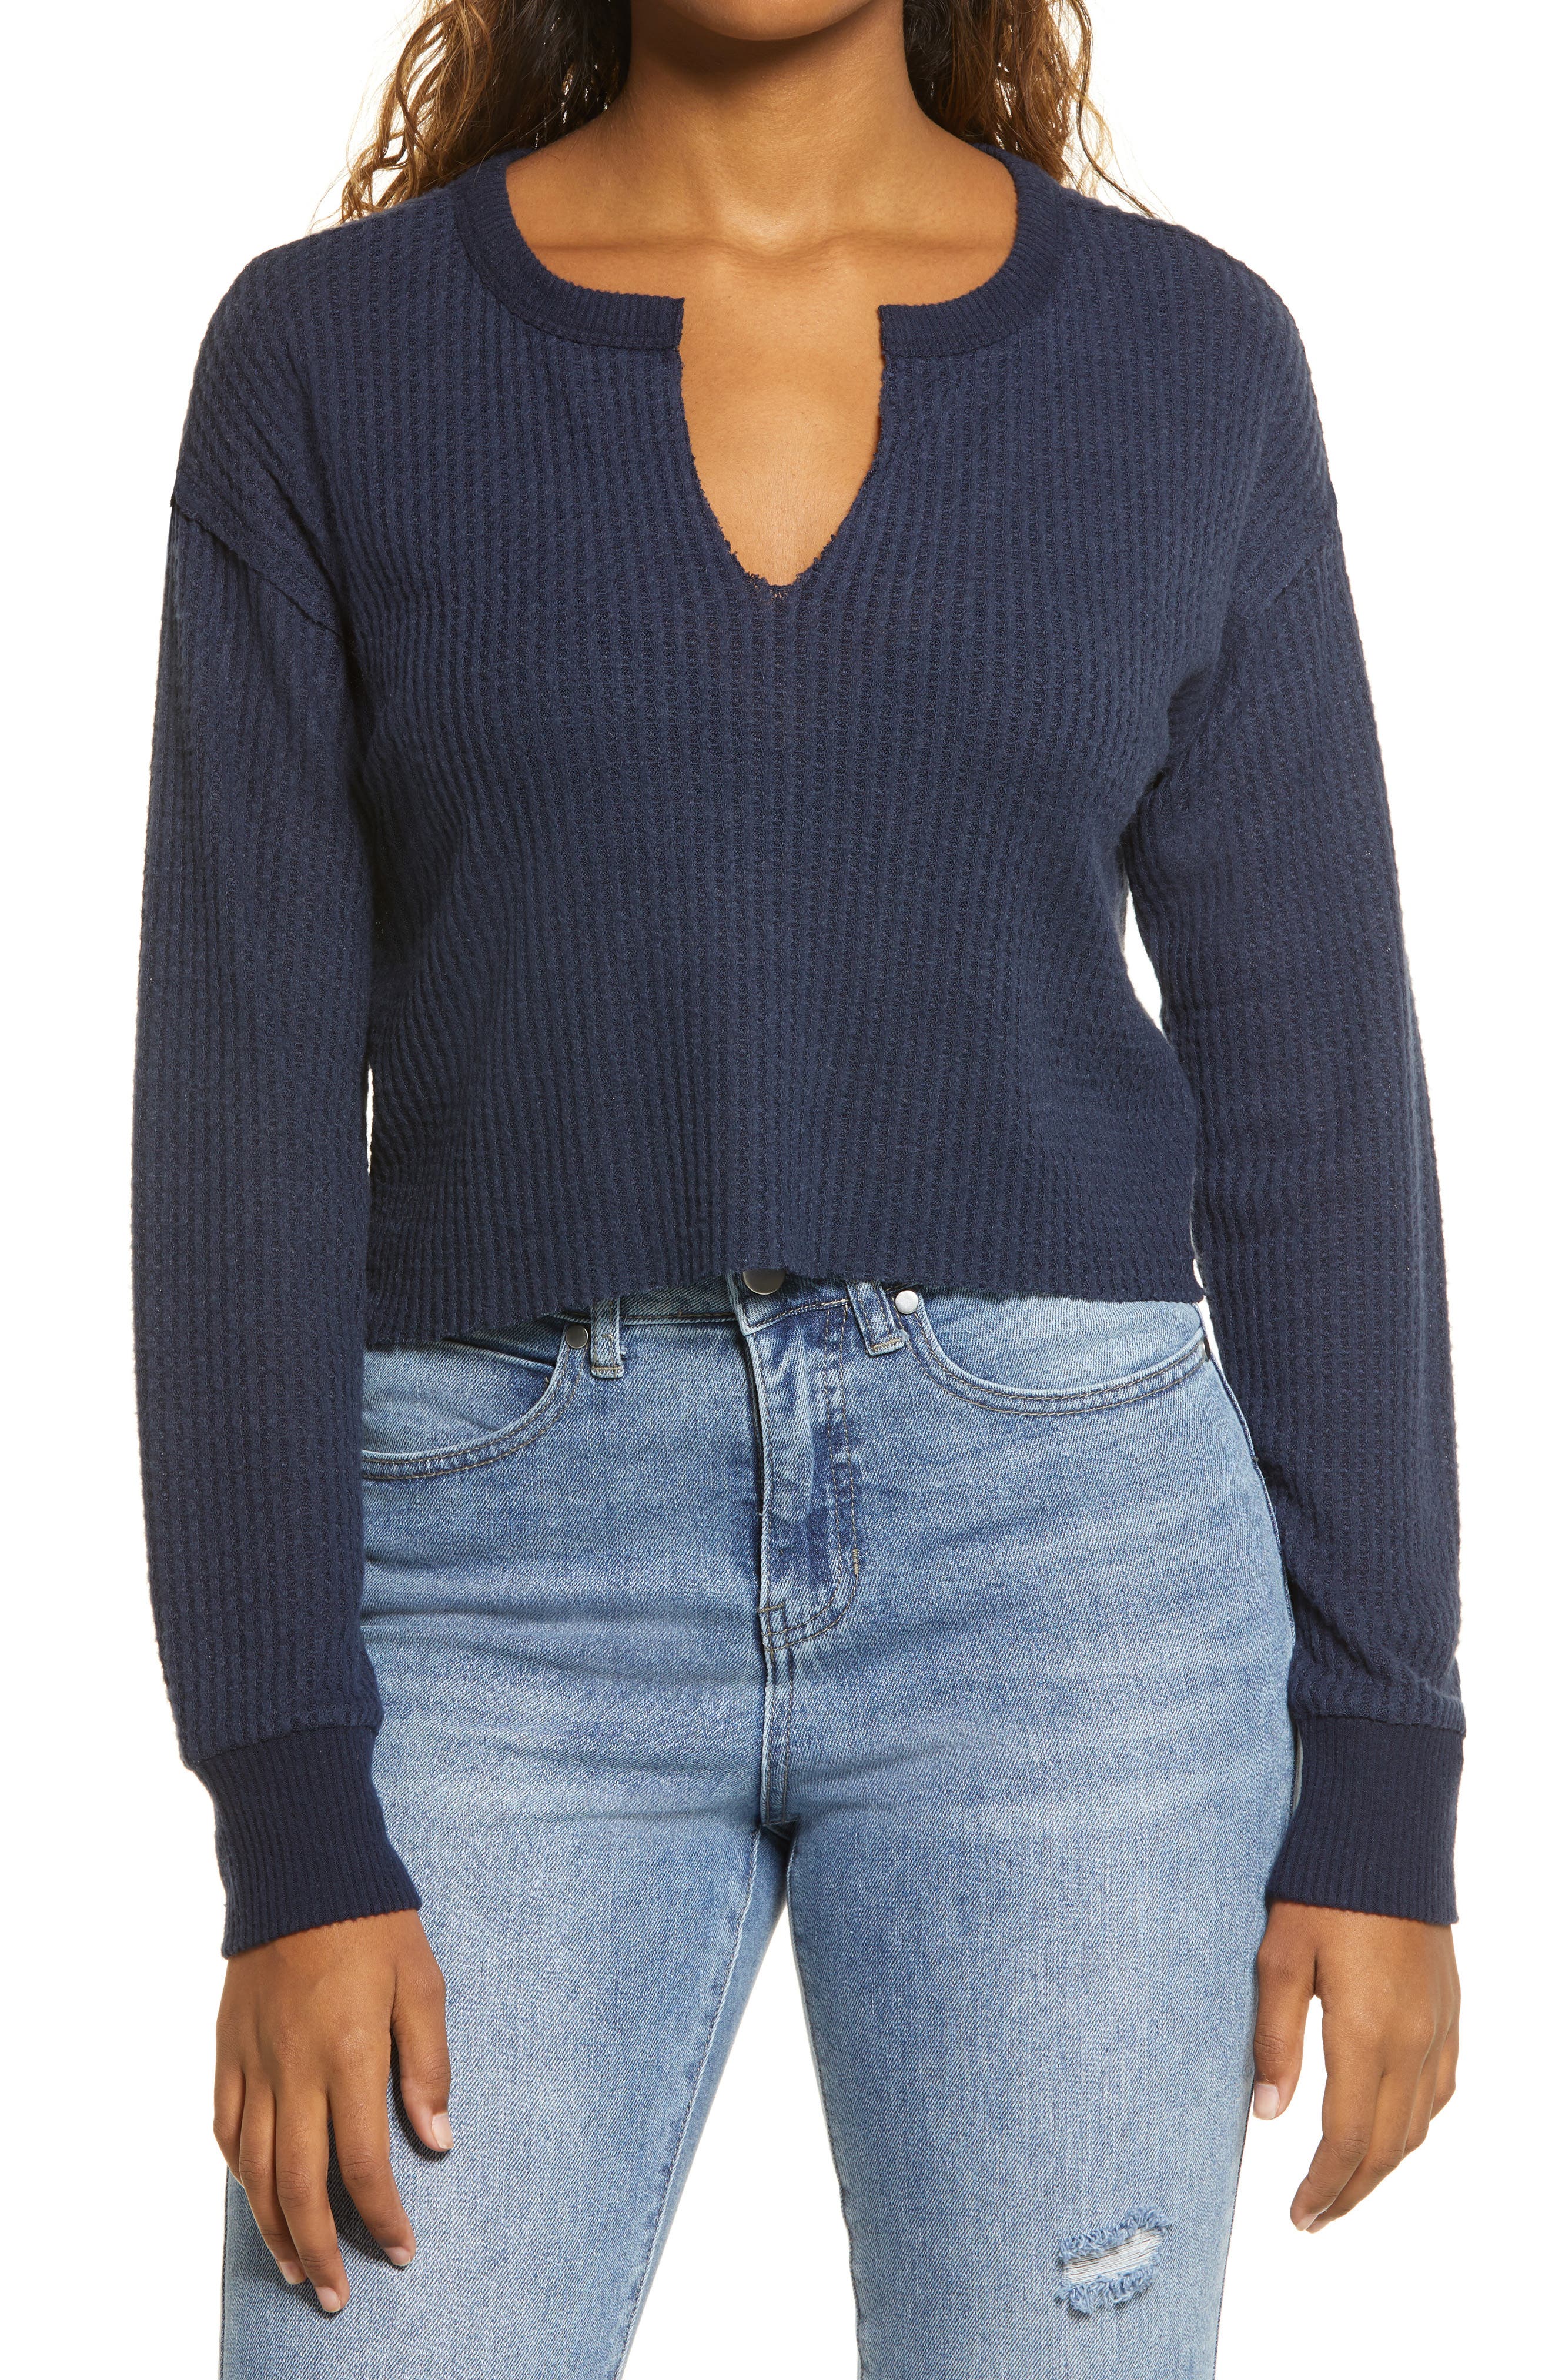 Deconstructed Hybrid Men/'s Flannel Shirt /& Women/'s V-Neck Sweater Create On Trend Cozy Top